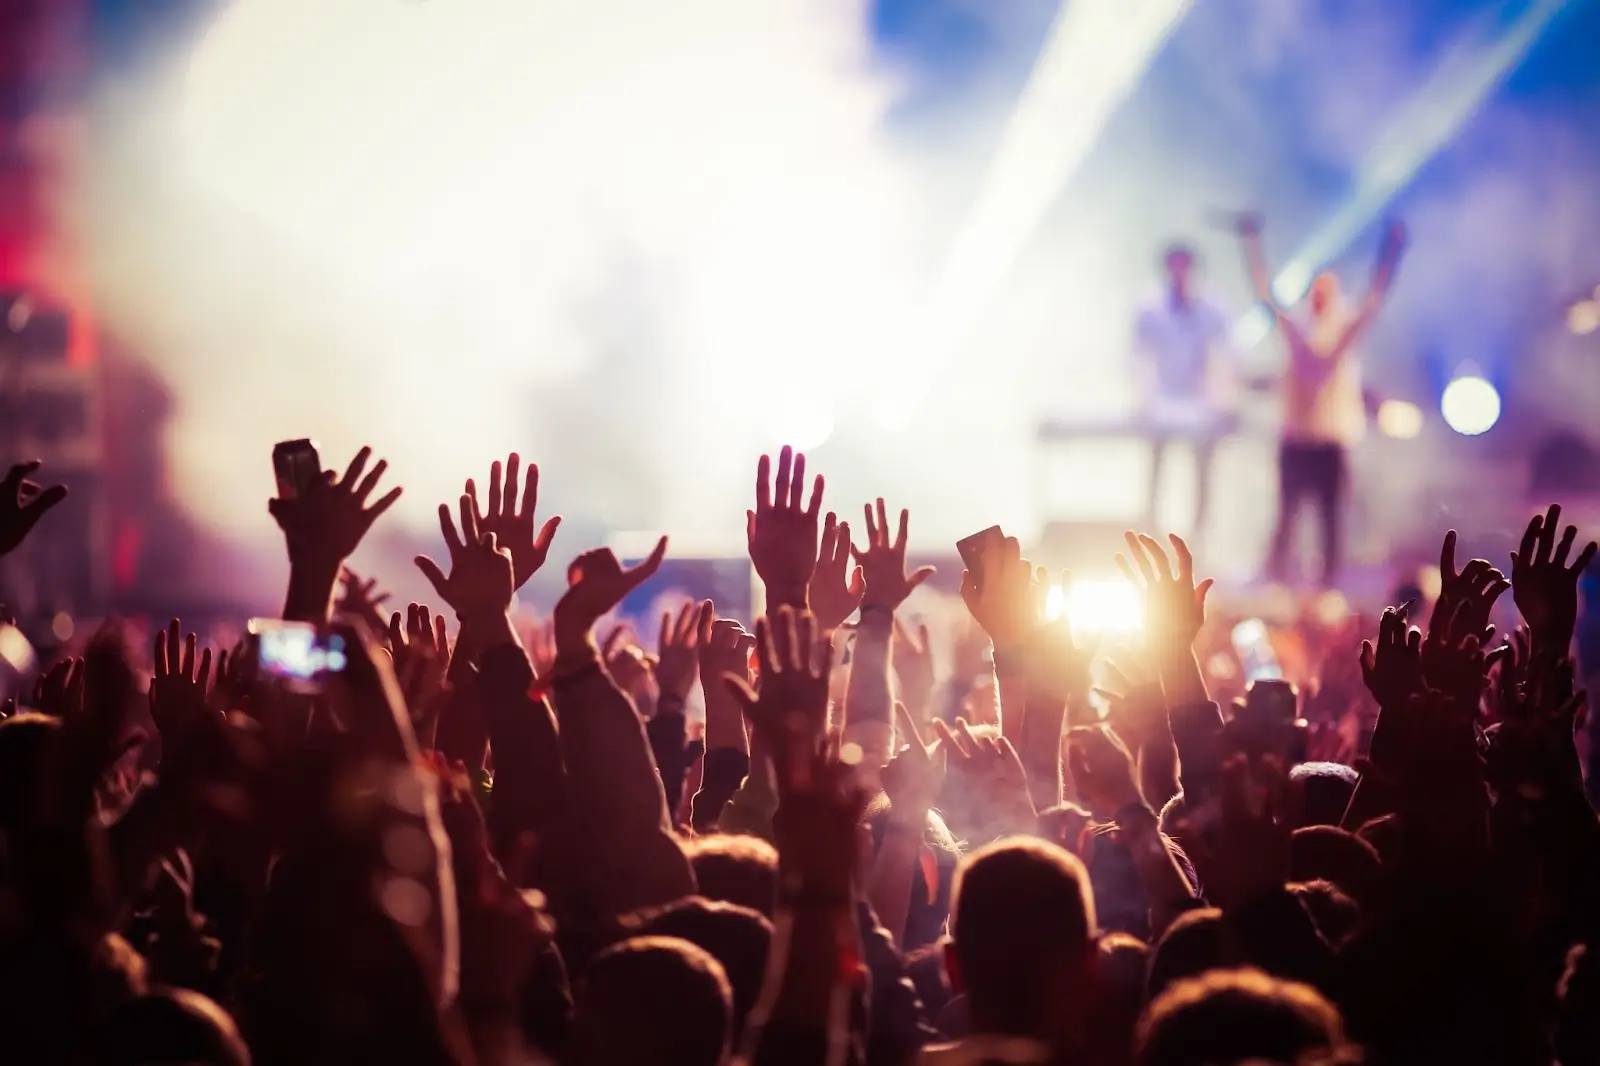 people at concert with hands in the air and stage in background